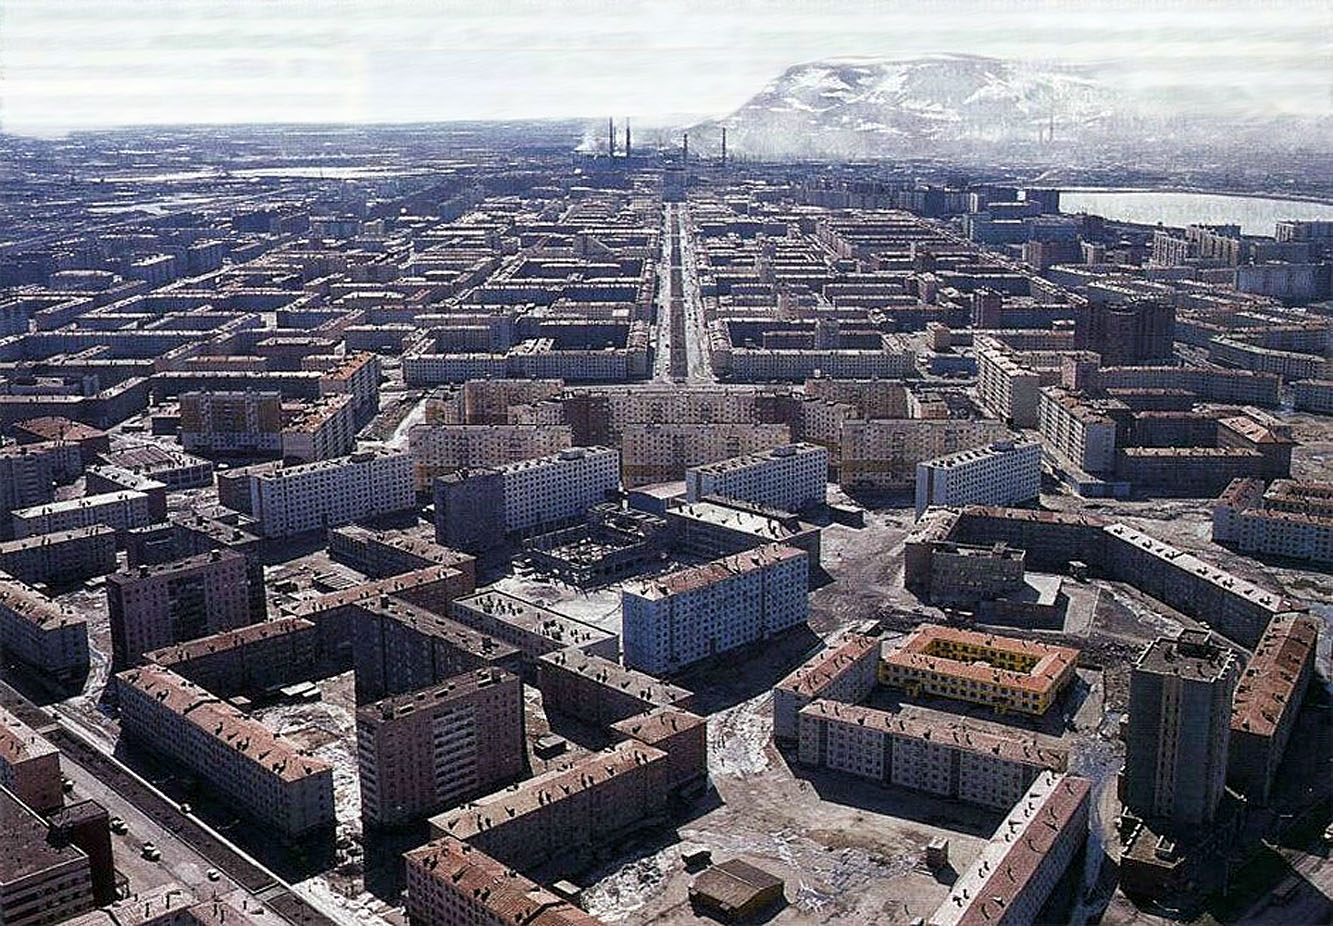 The most depressing city I ever seen, Norilsk, Russia